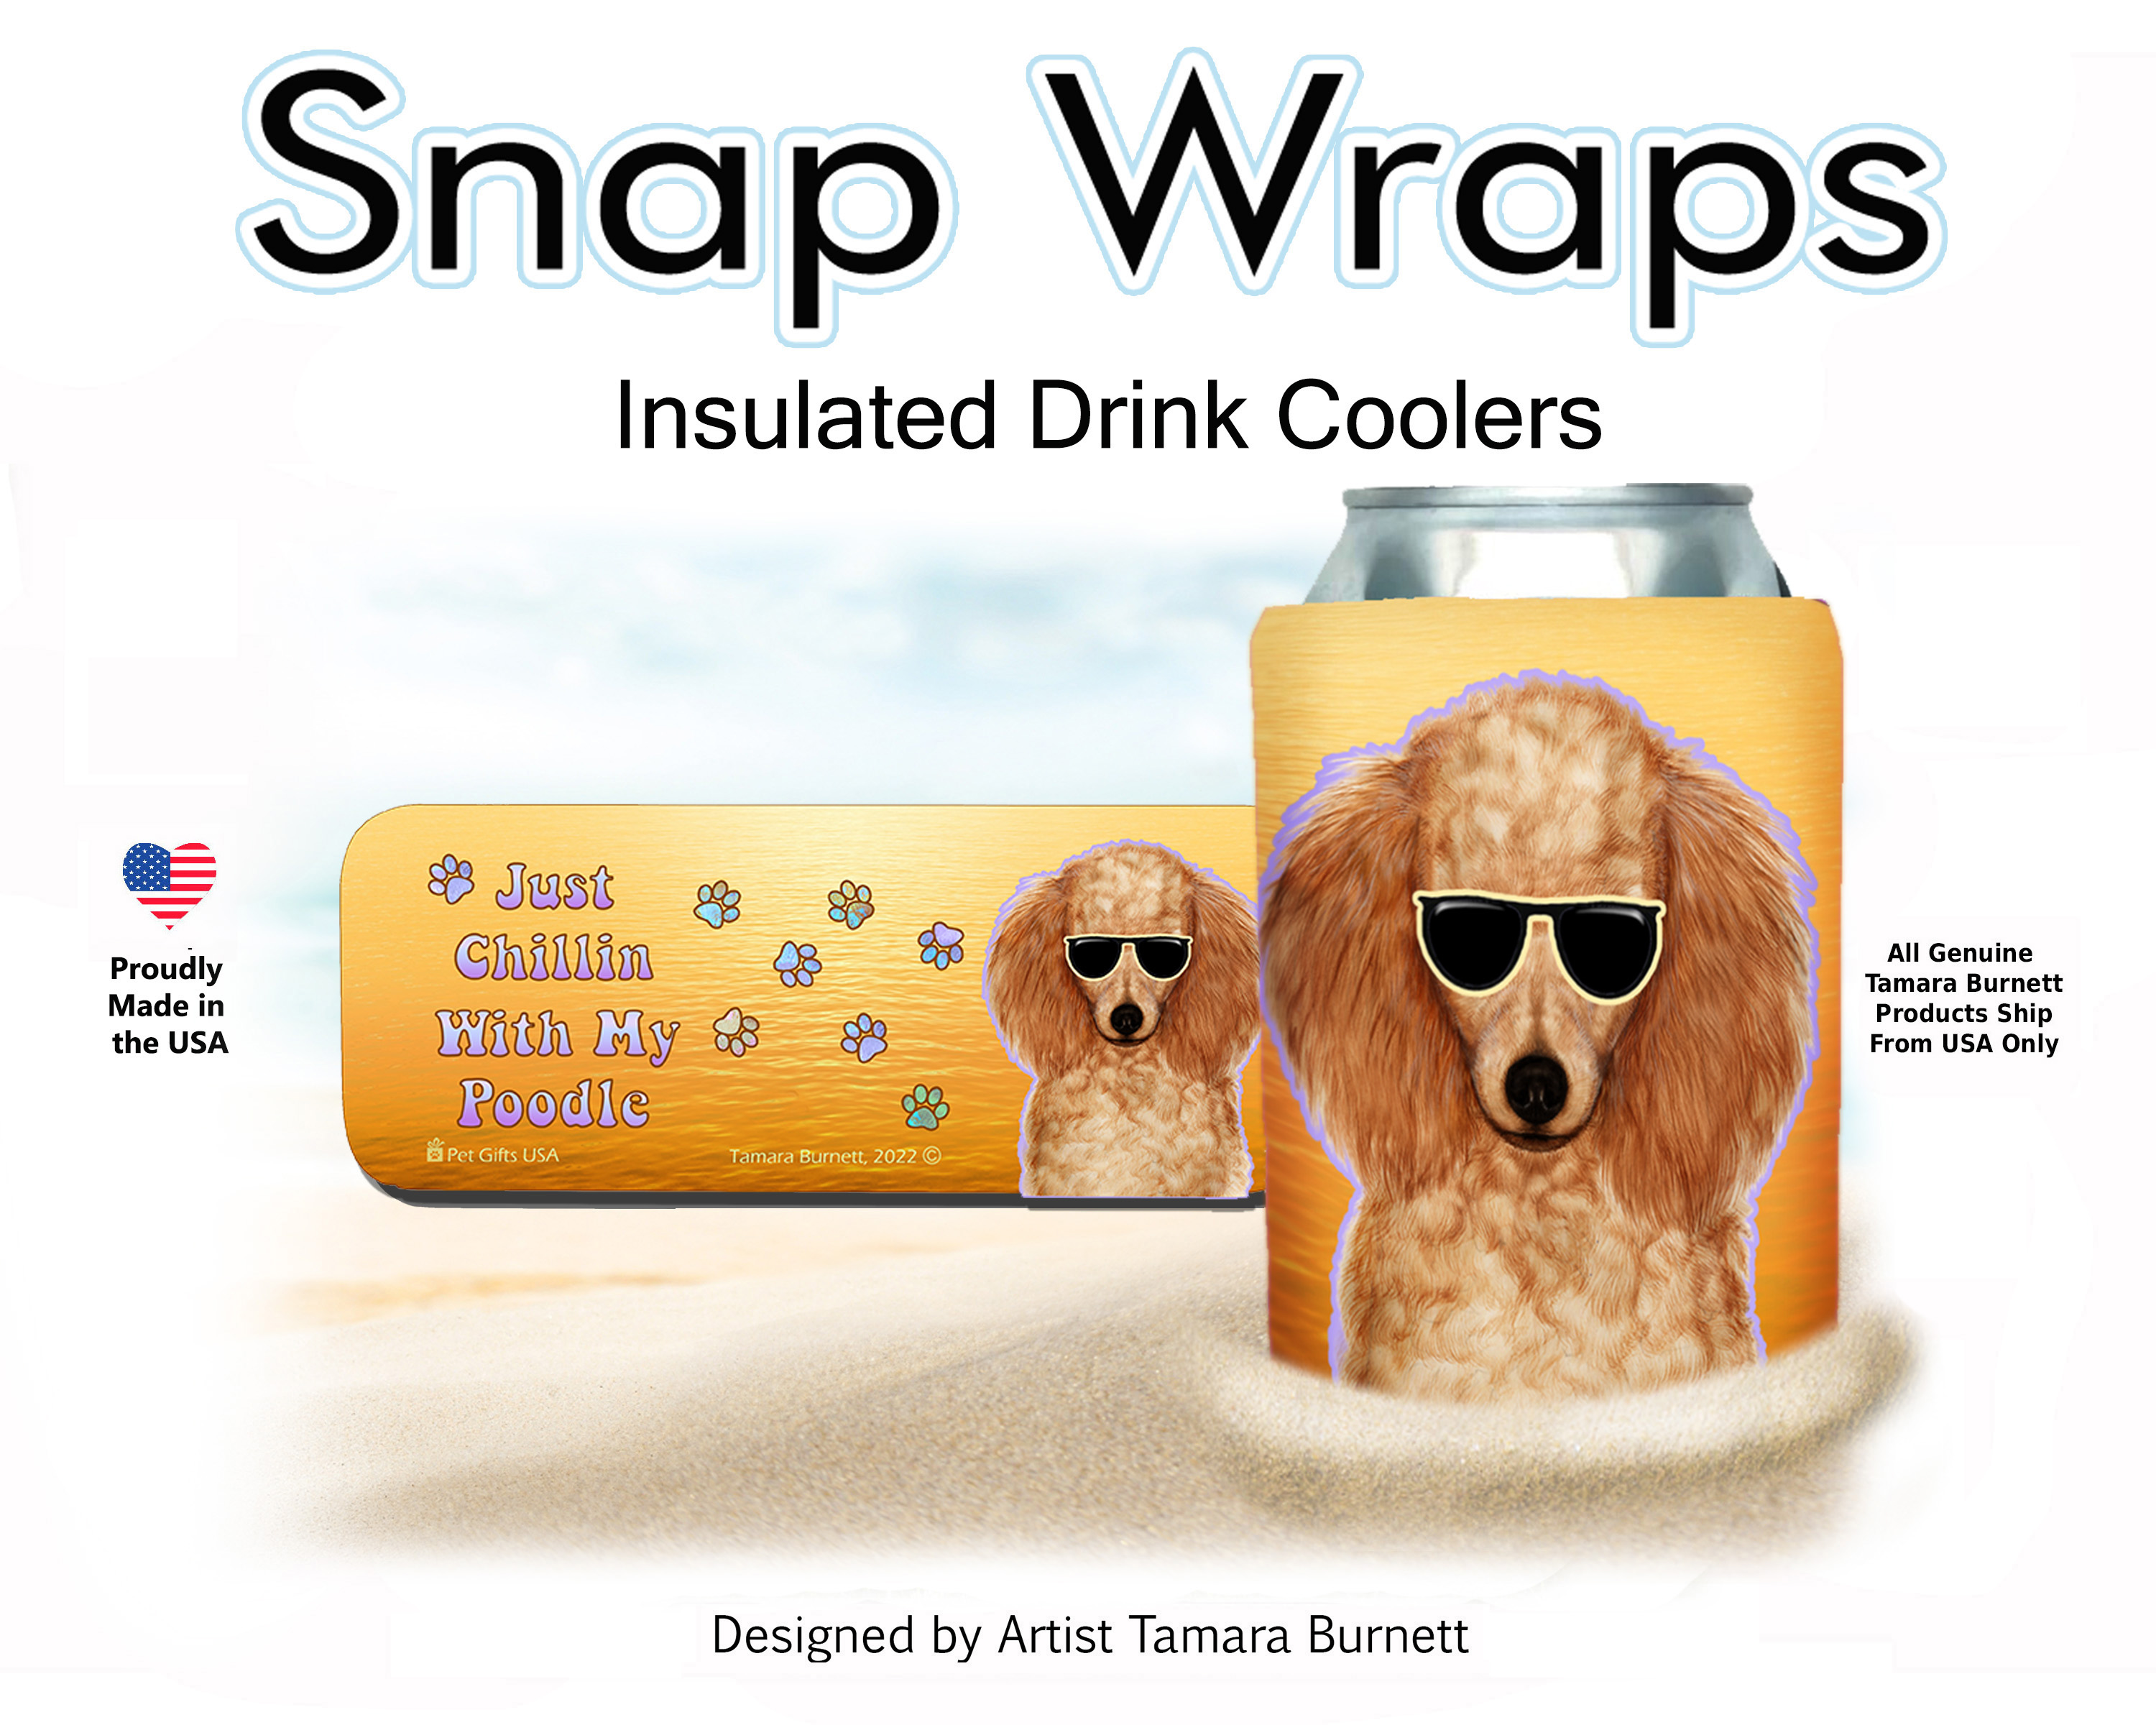 An image of the Poodle Apricot Snap Wrap Insulated Drink Holder